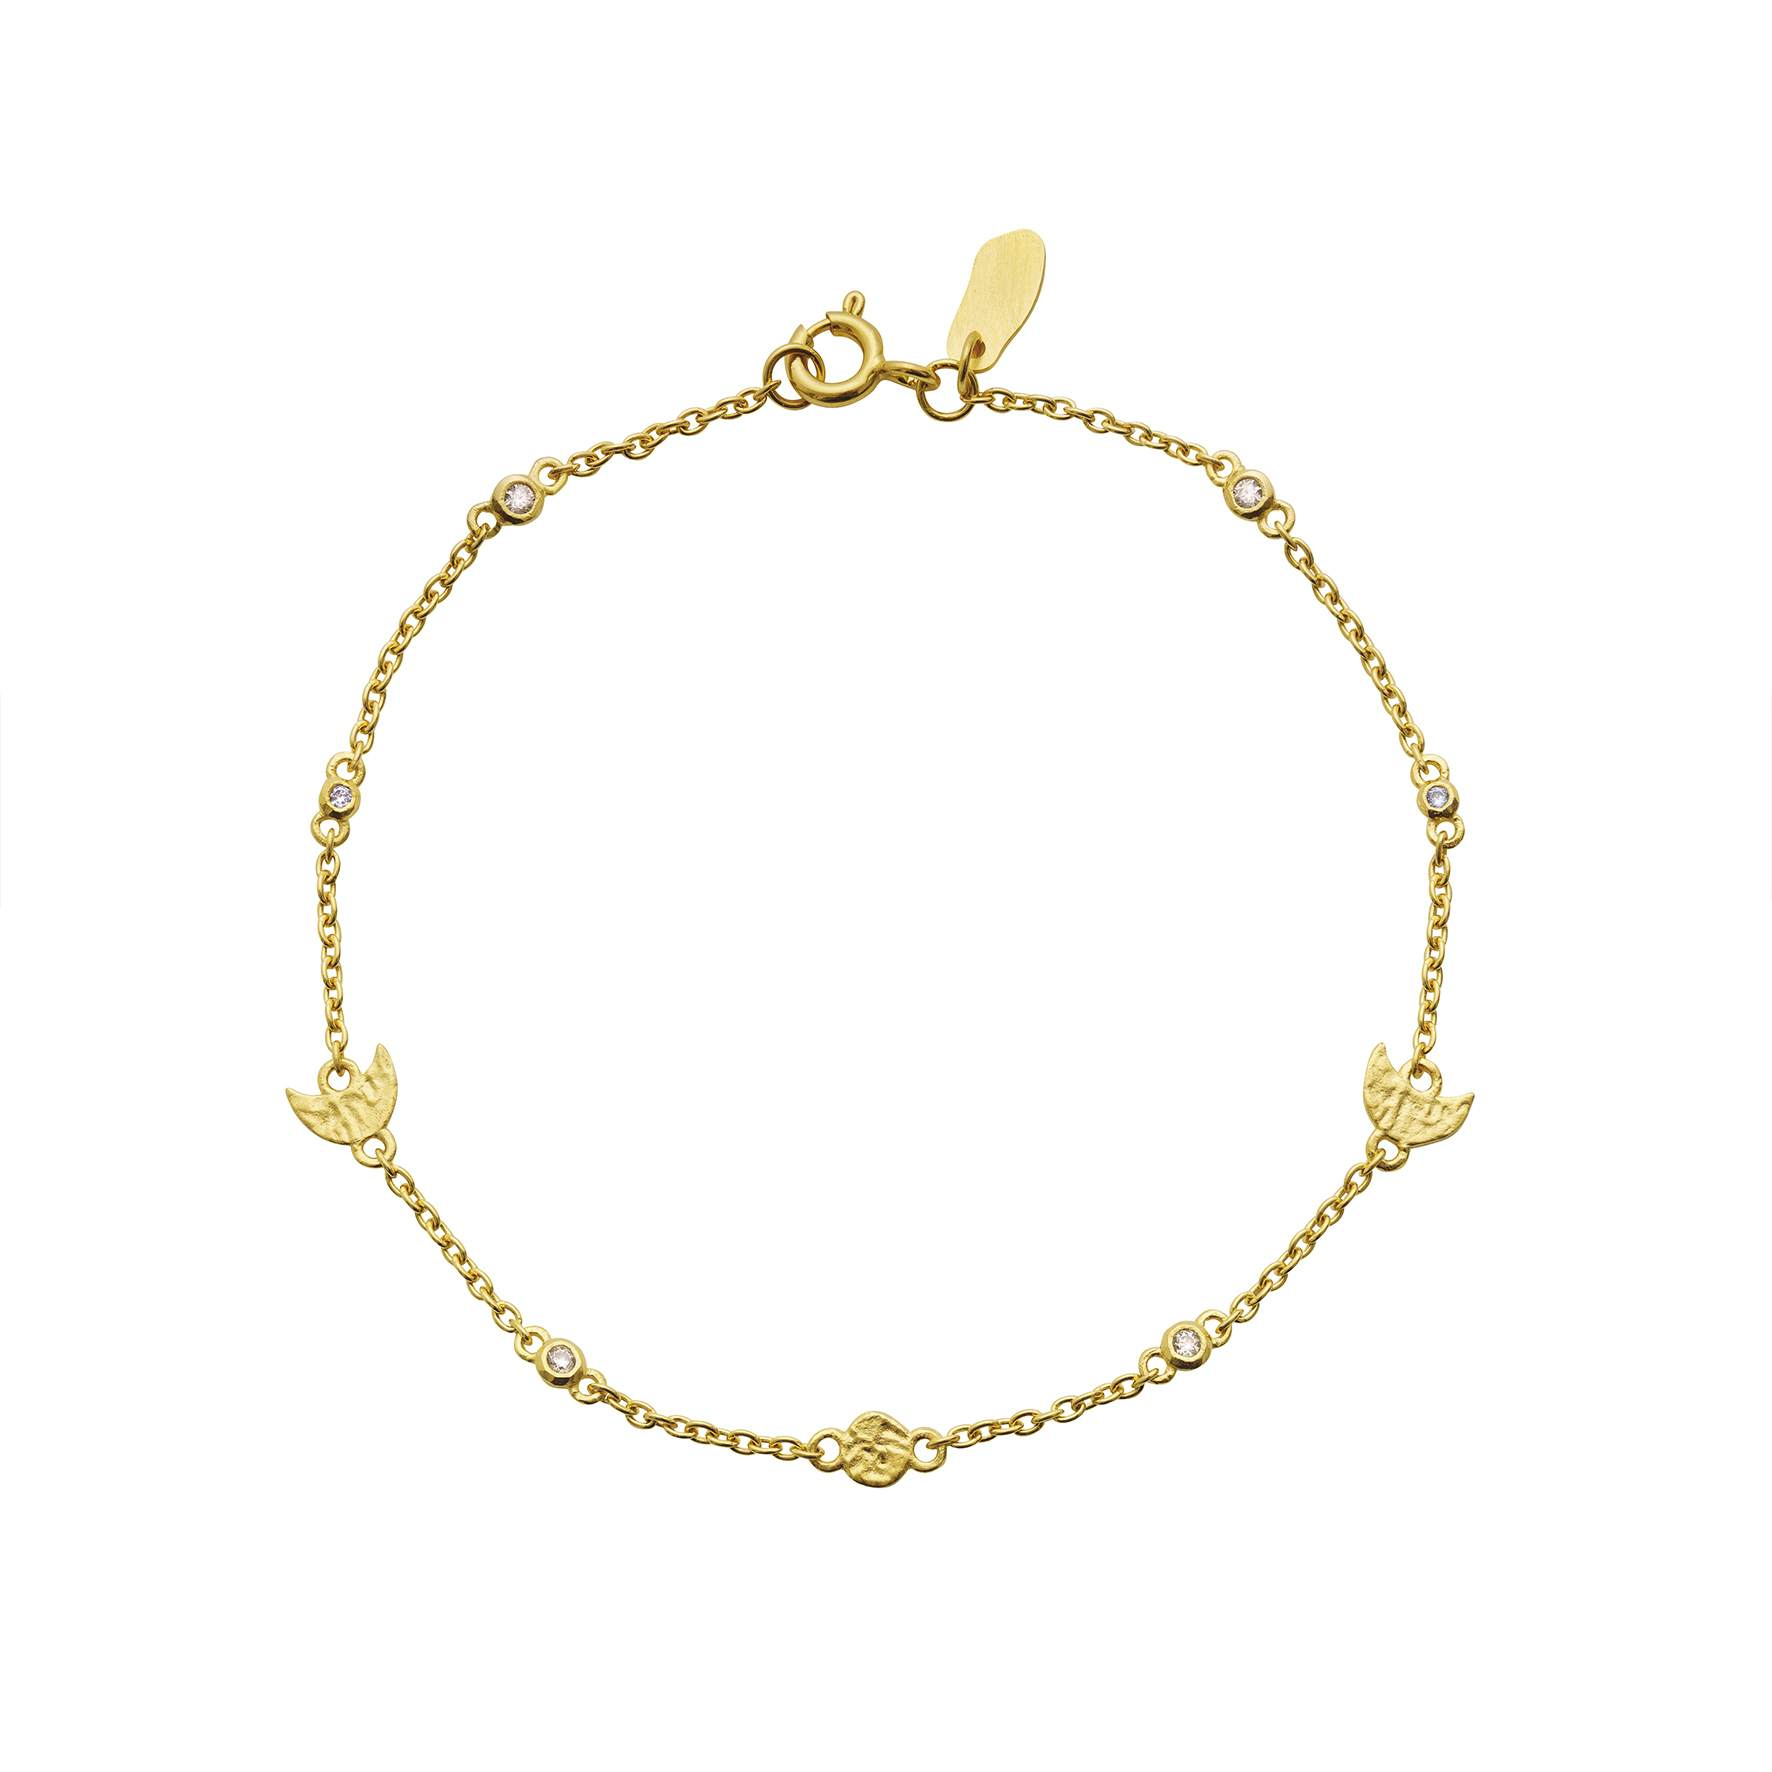 Cecilia Bracelet from Maanesten in Goldplated-Silver Sterling 925